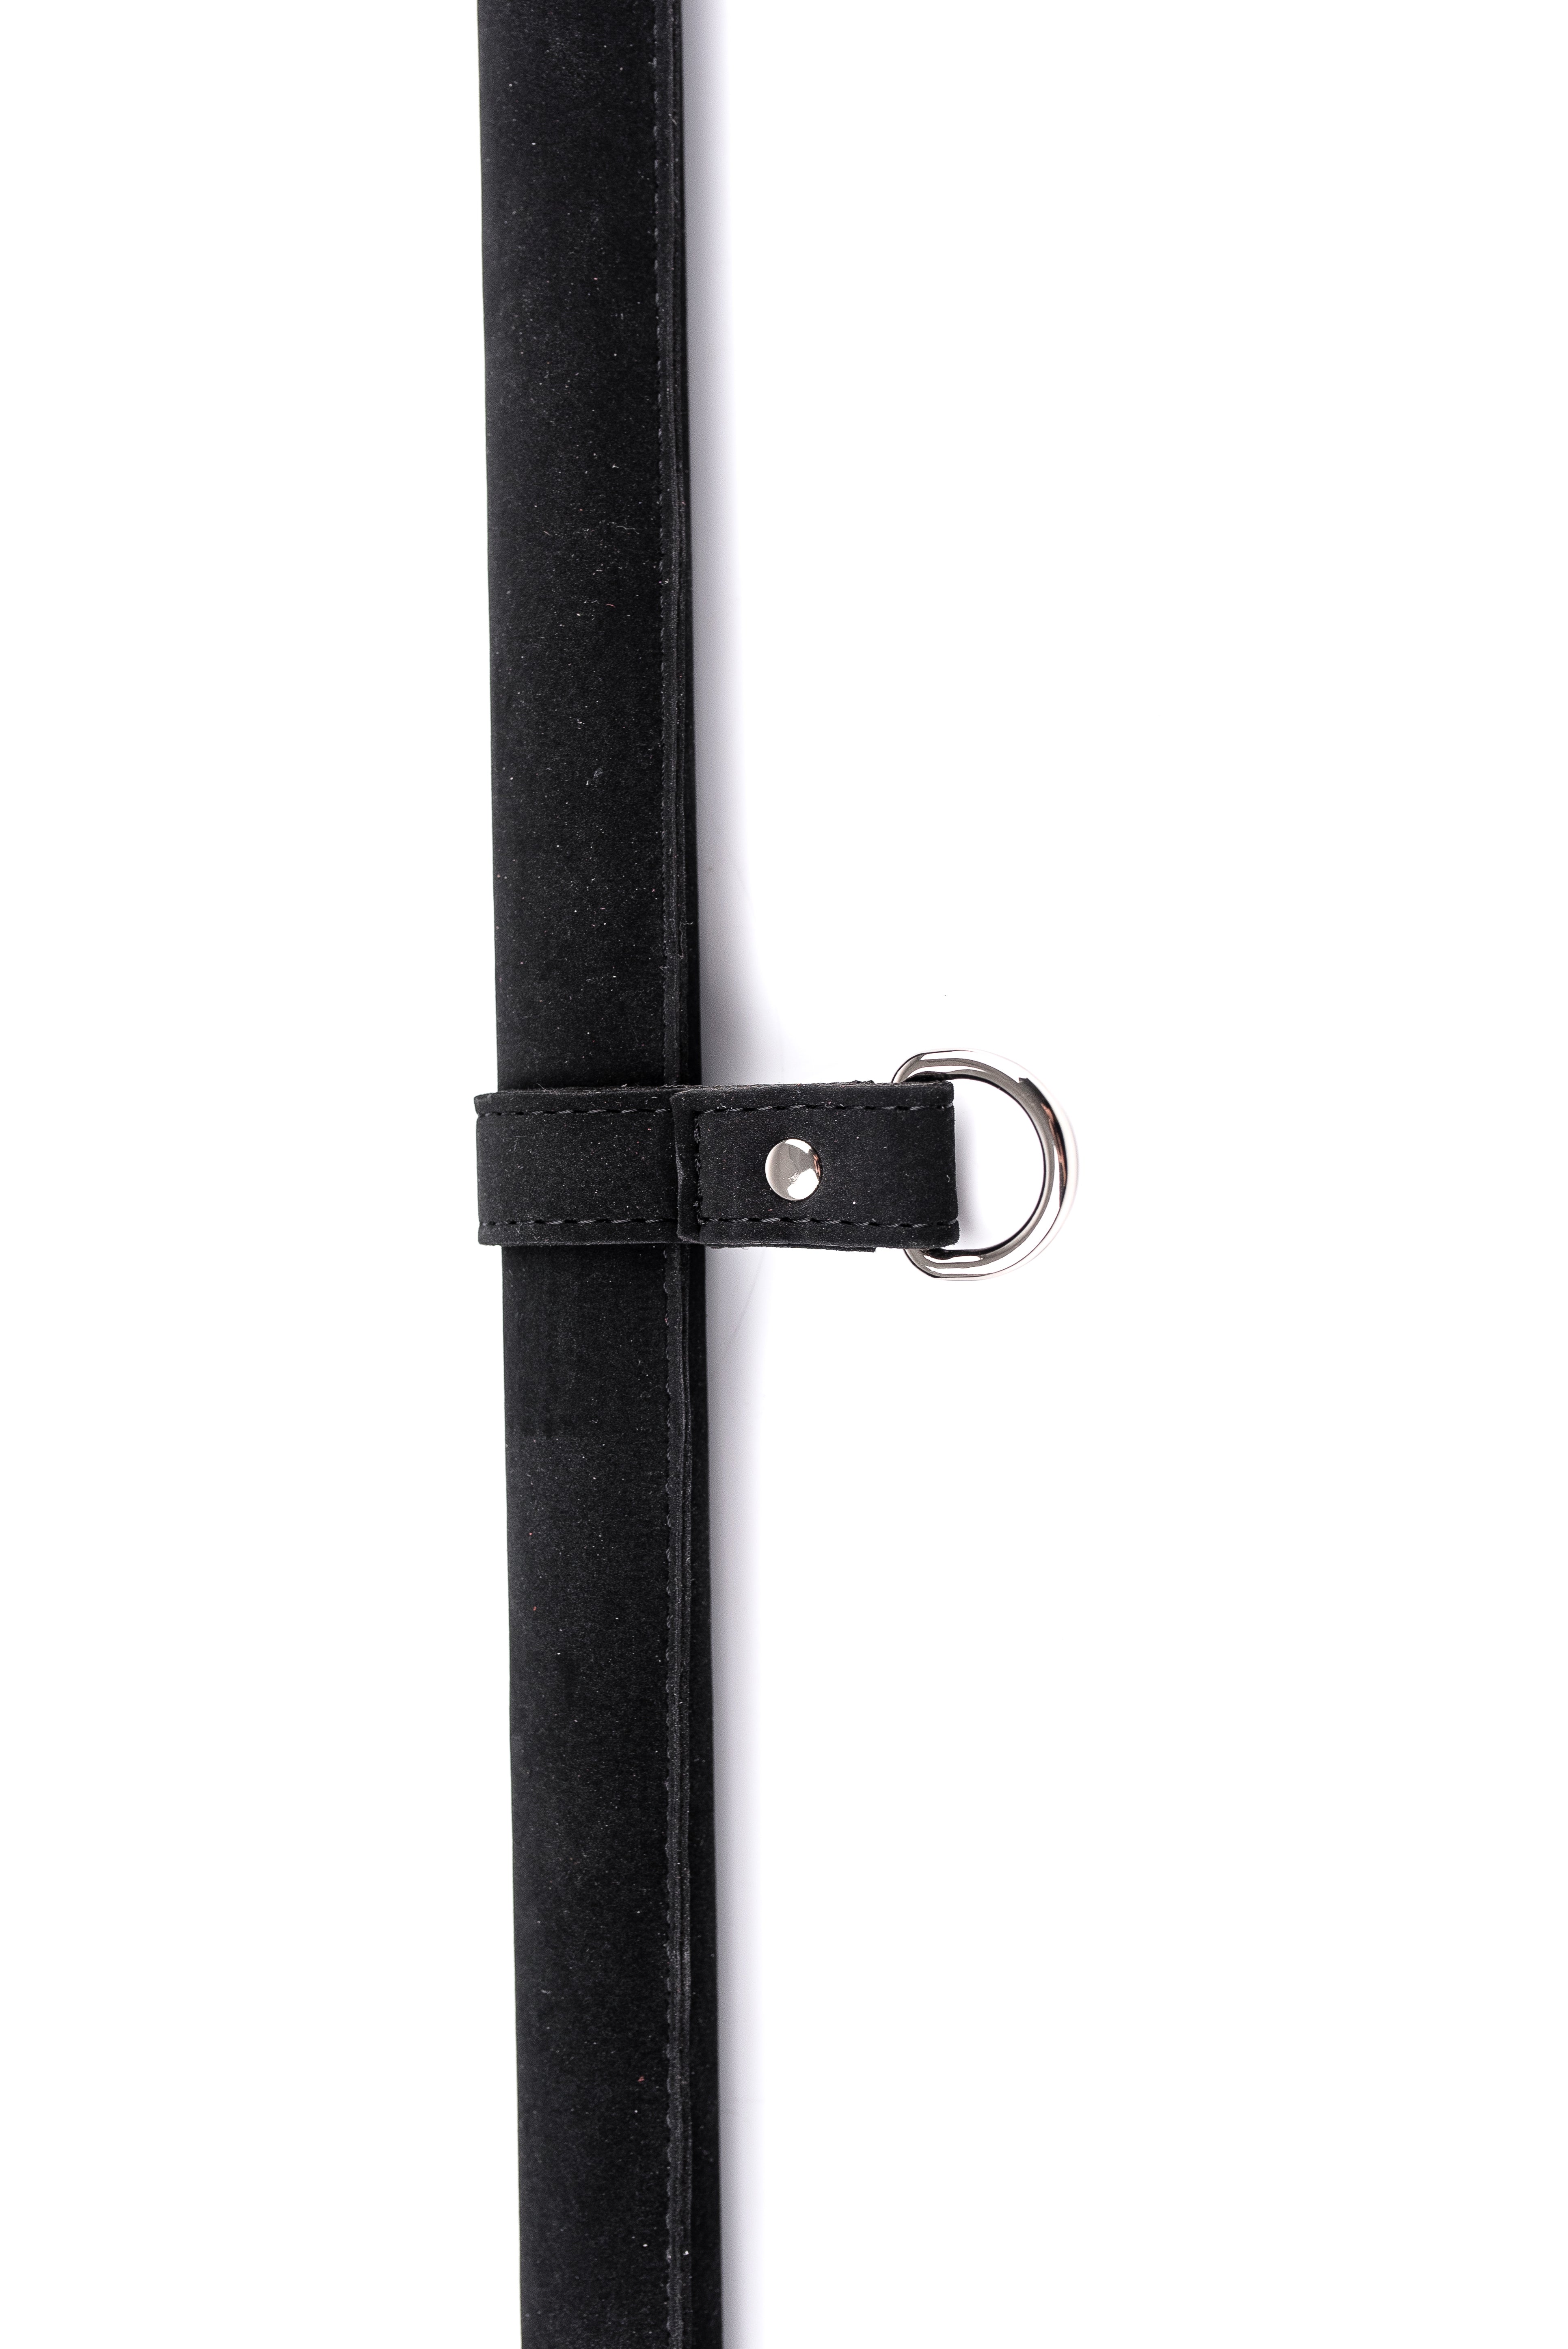 3 Point BDSM Faux Leather Spreader Bar with cuff hooks